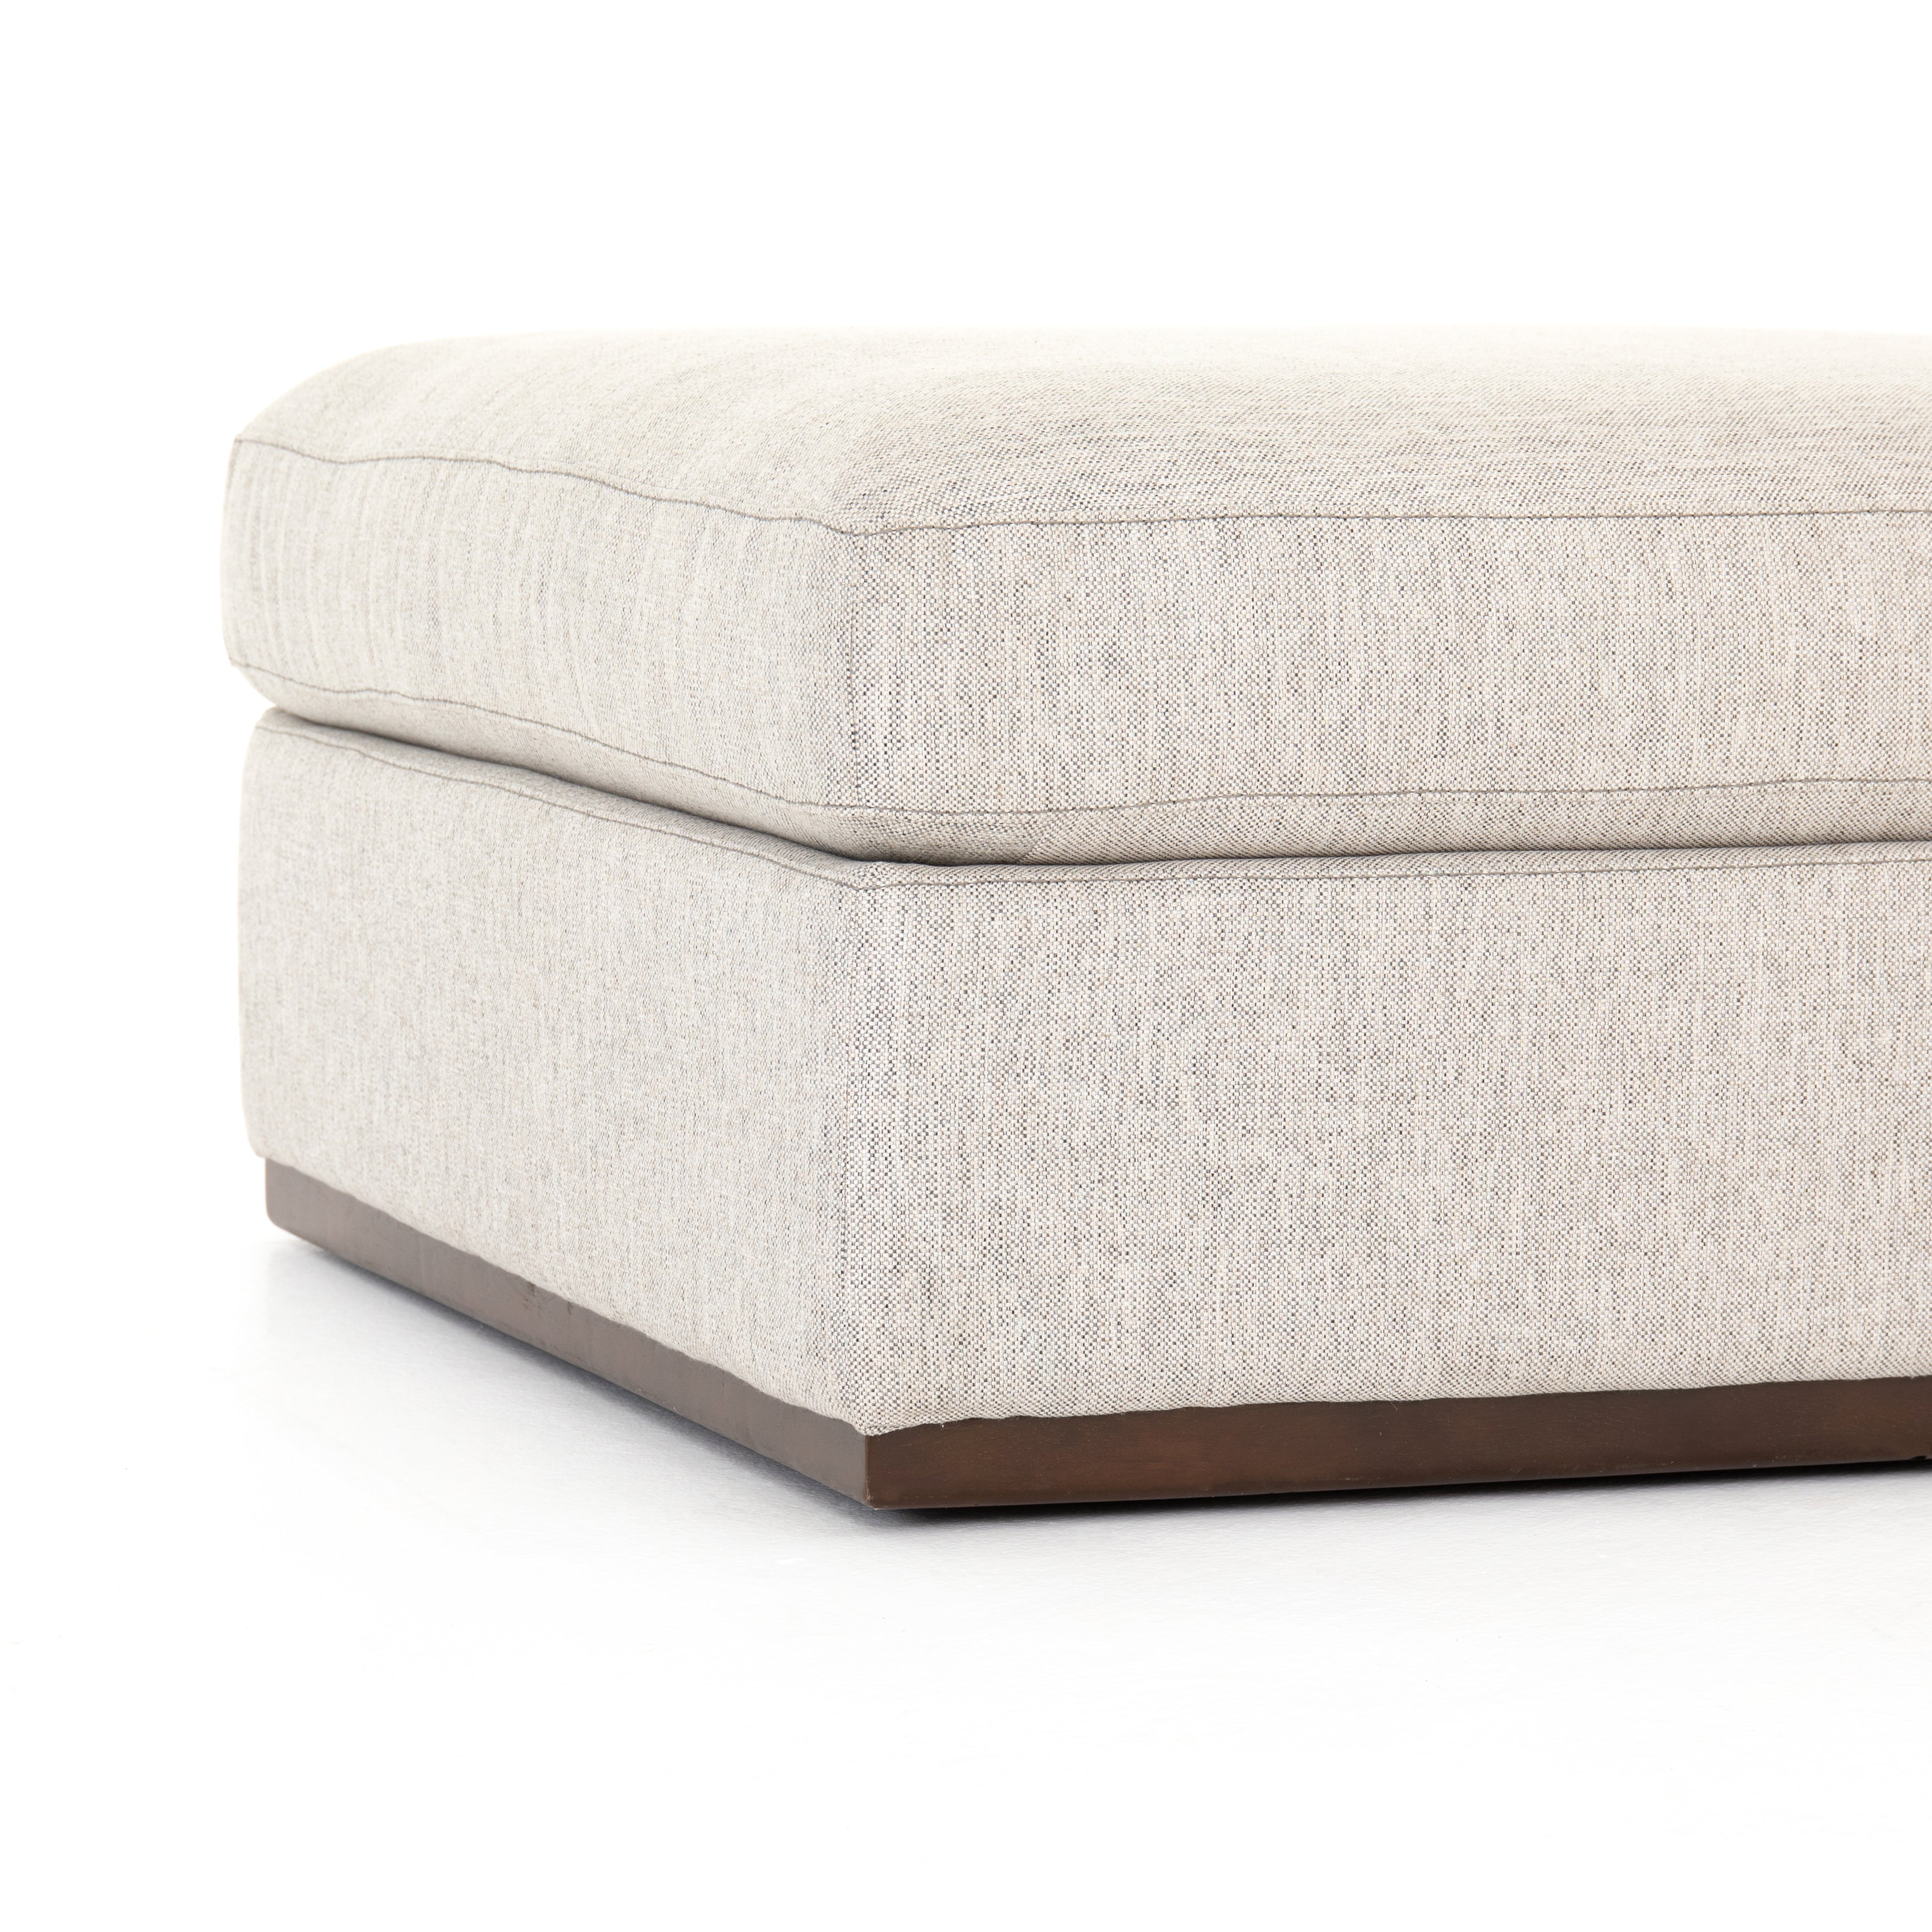 This Colt Ottoman - Aldred Silver has a textural poly/linen blend with a gorgeous wood base. A shapely and simply styled ottoman to add to your living room or lounge area.   Overall Dimensions: 35.50"w x 35.50"d x 18.00"h